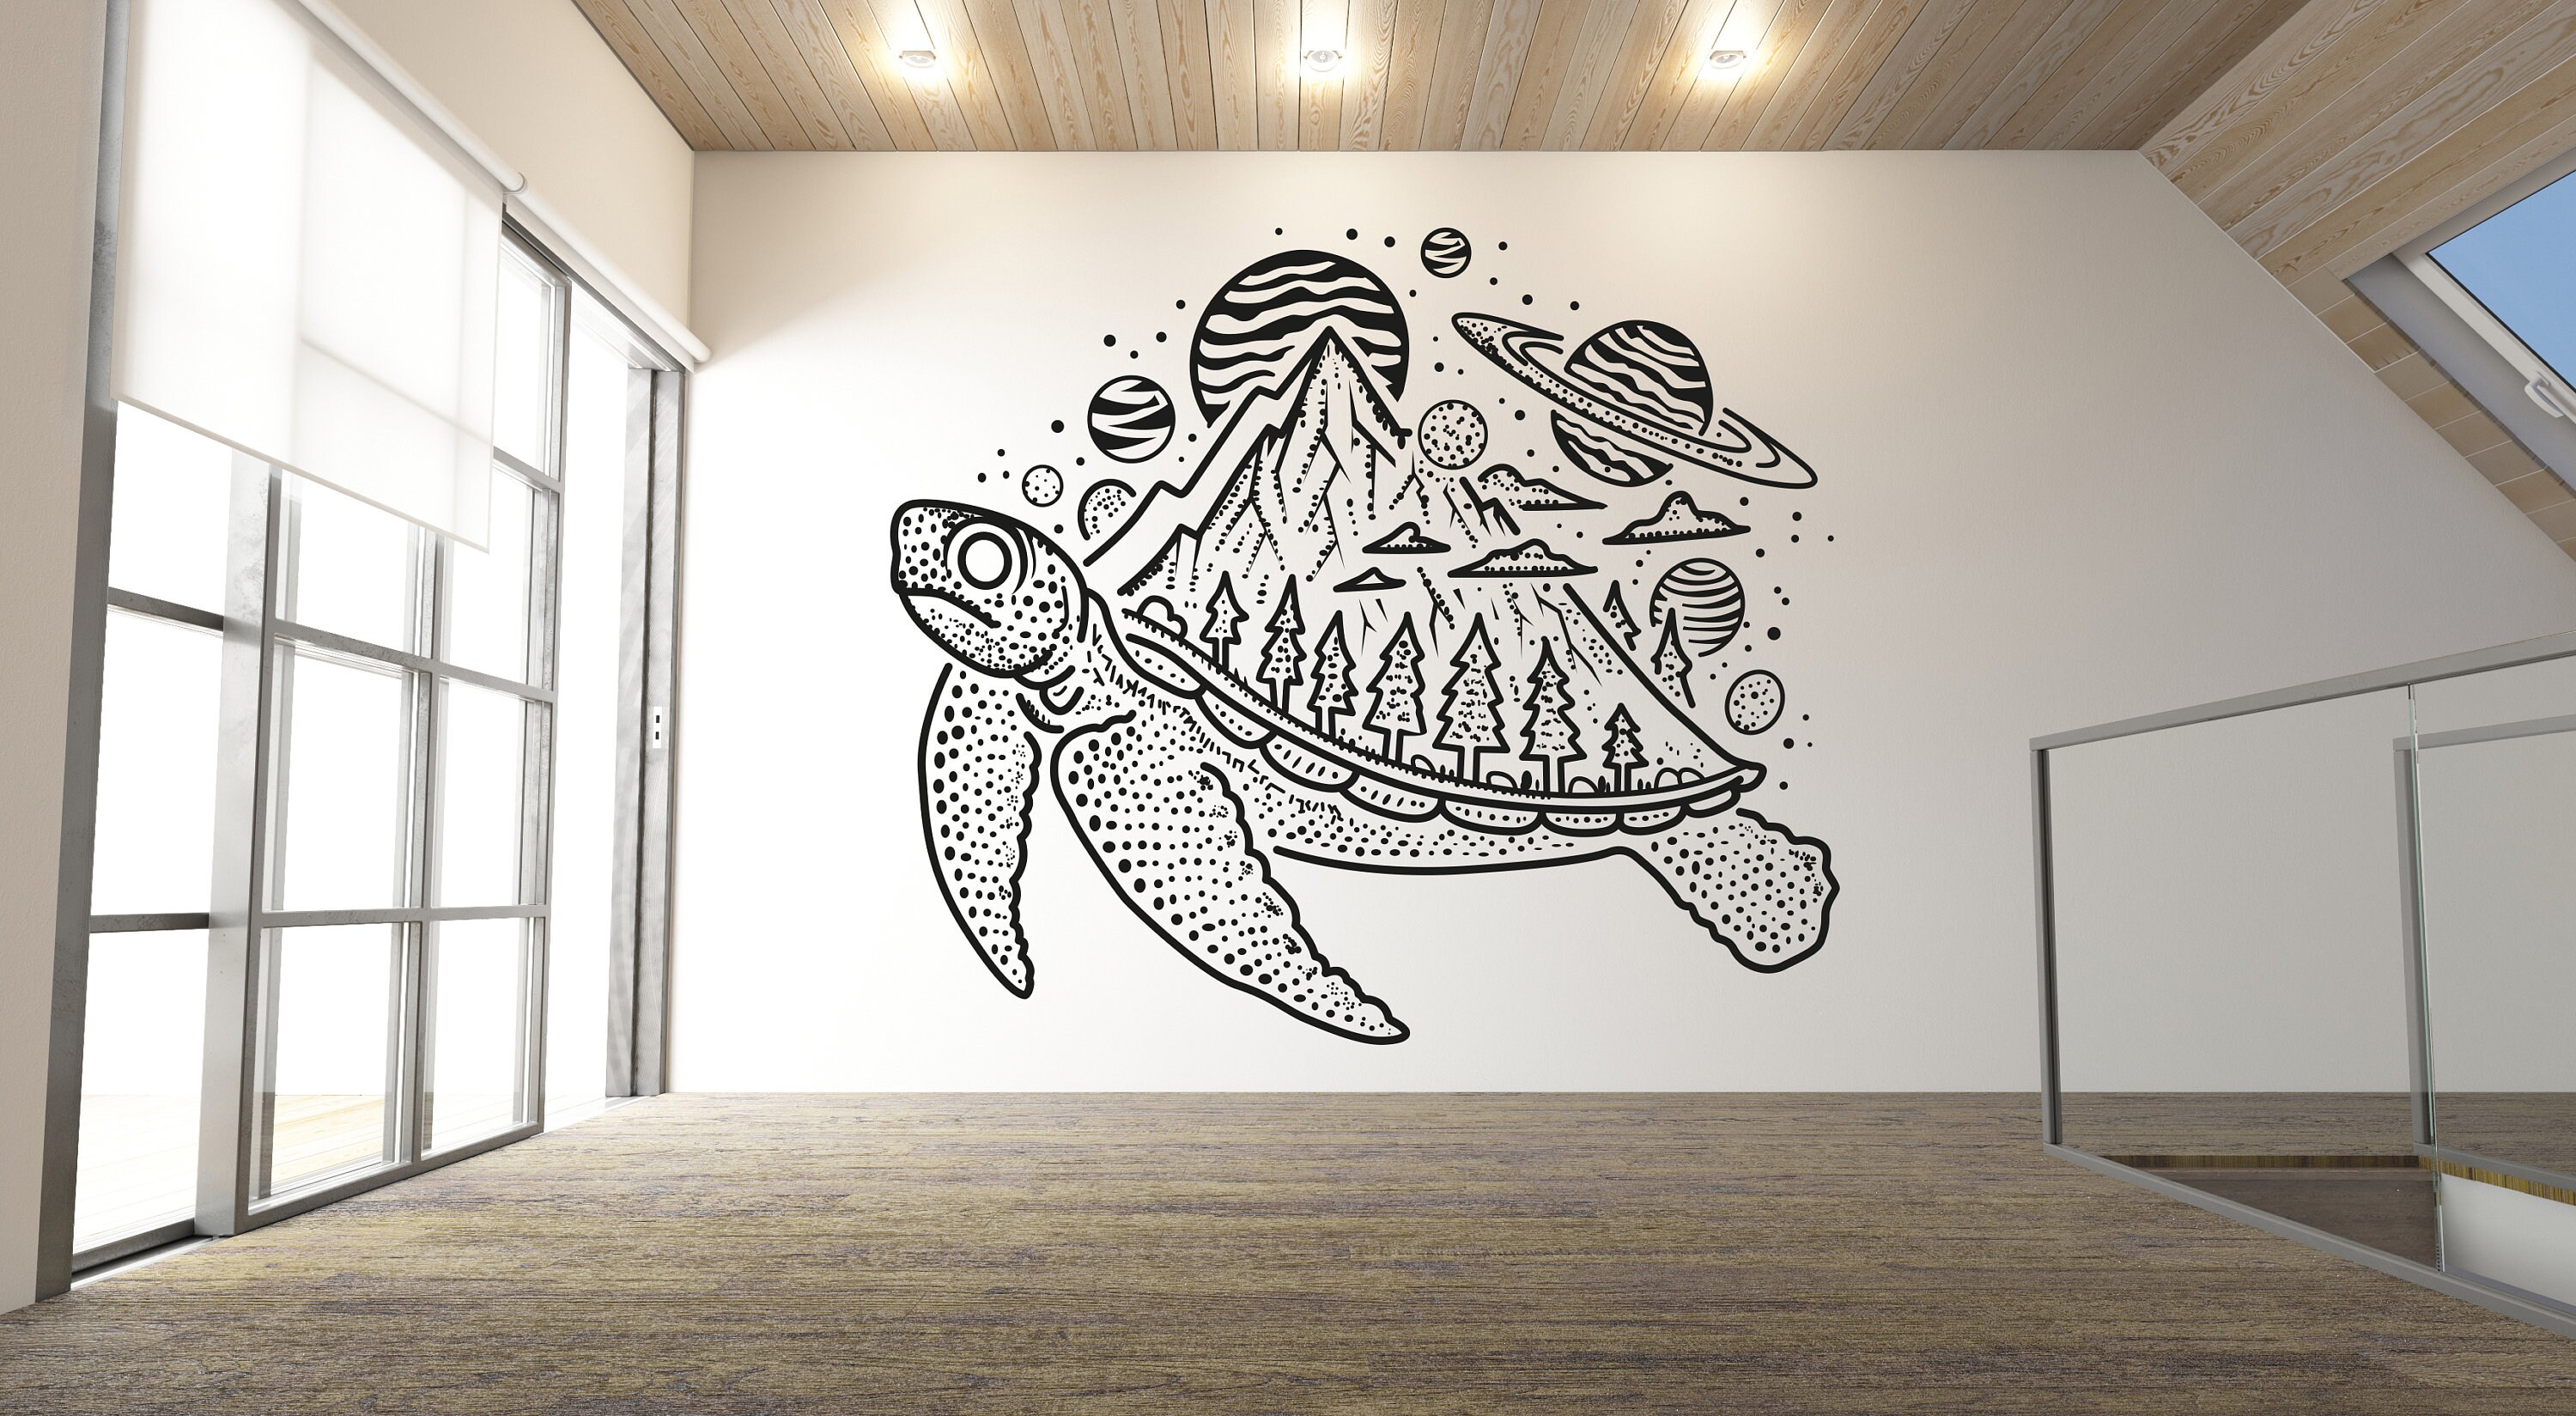 Sea Turtle Wall Decals Stickers Glow in The Dark Wall Decals Vinyl Ocean Wall Decals Under The Sea Turtle Bathroom Wall Decor for Kids Sea Life Wall Decor for Bedroom Nursery Birthday Gifts 